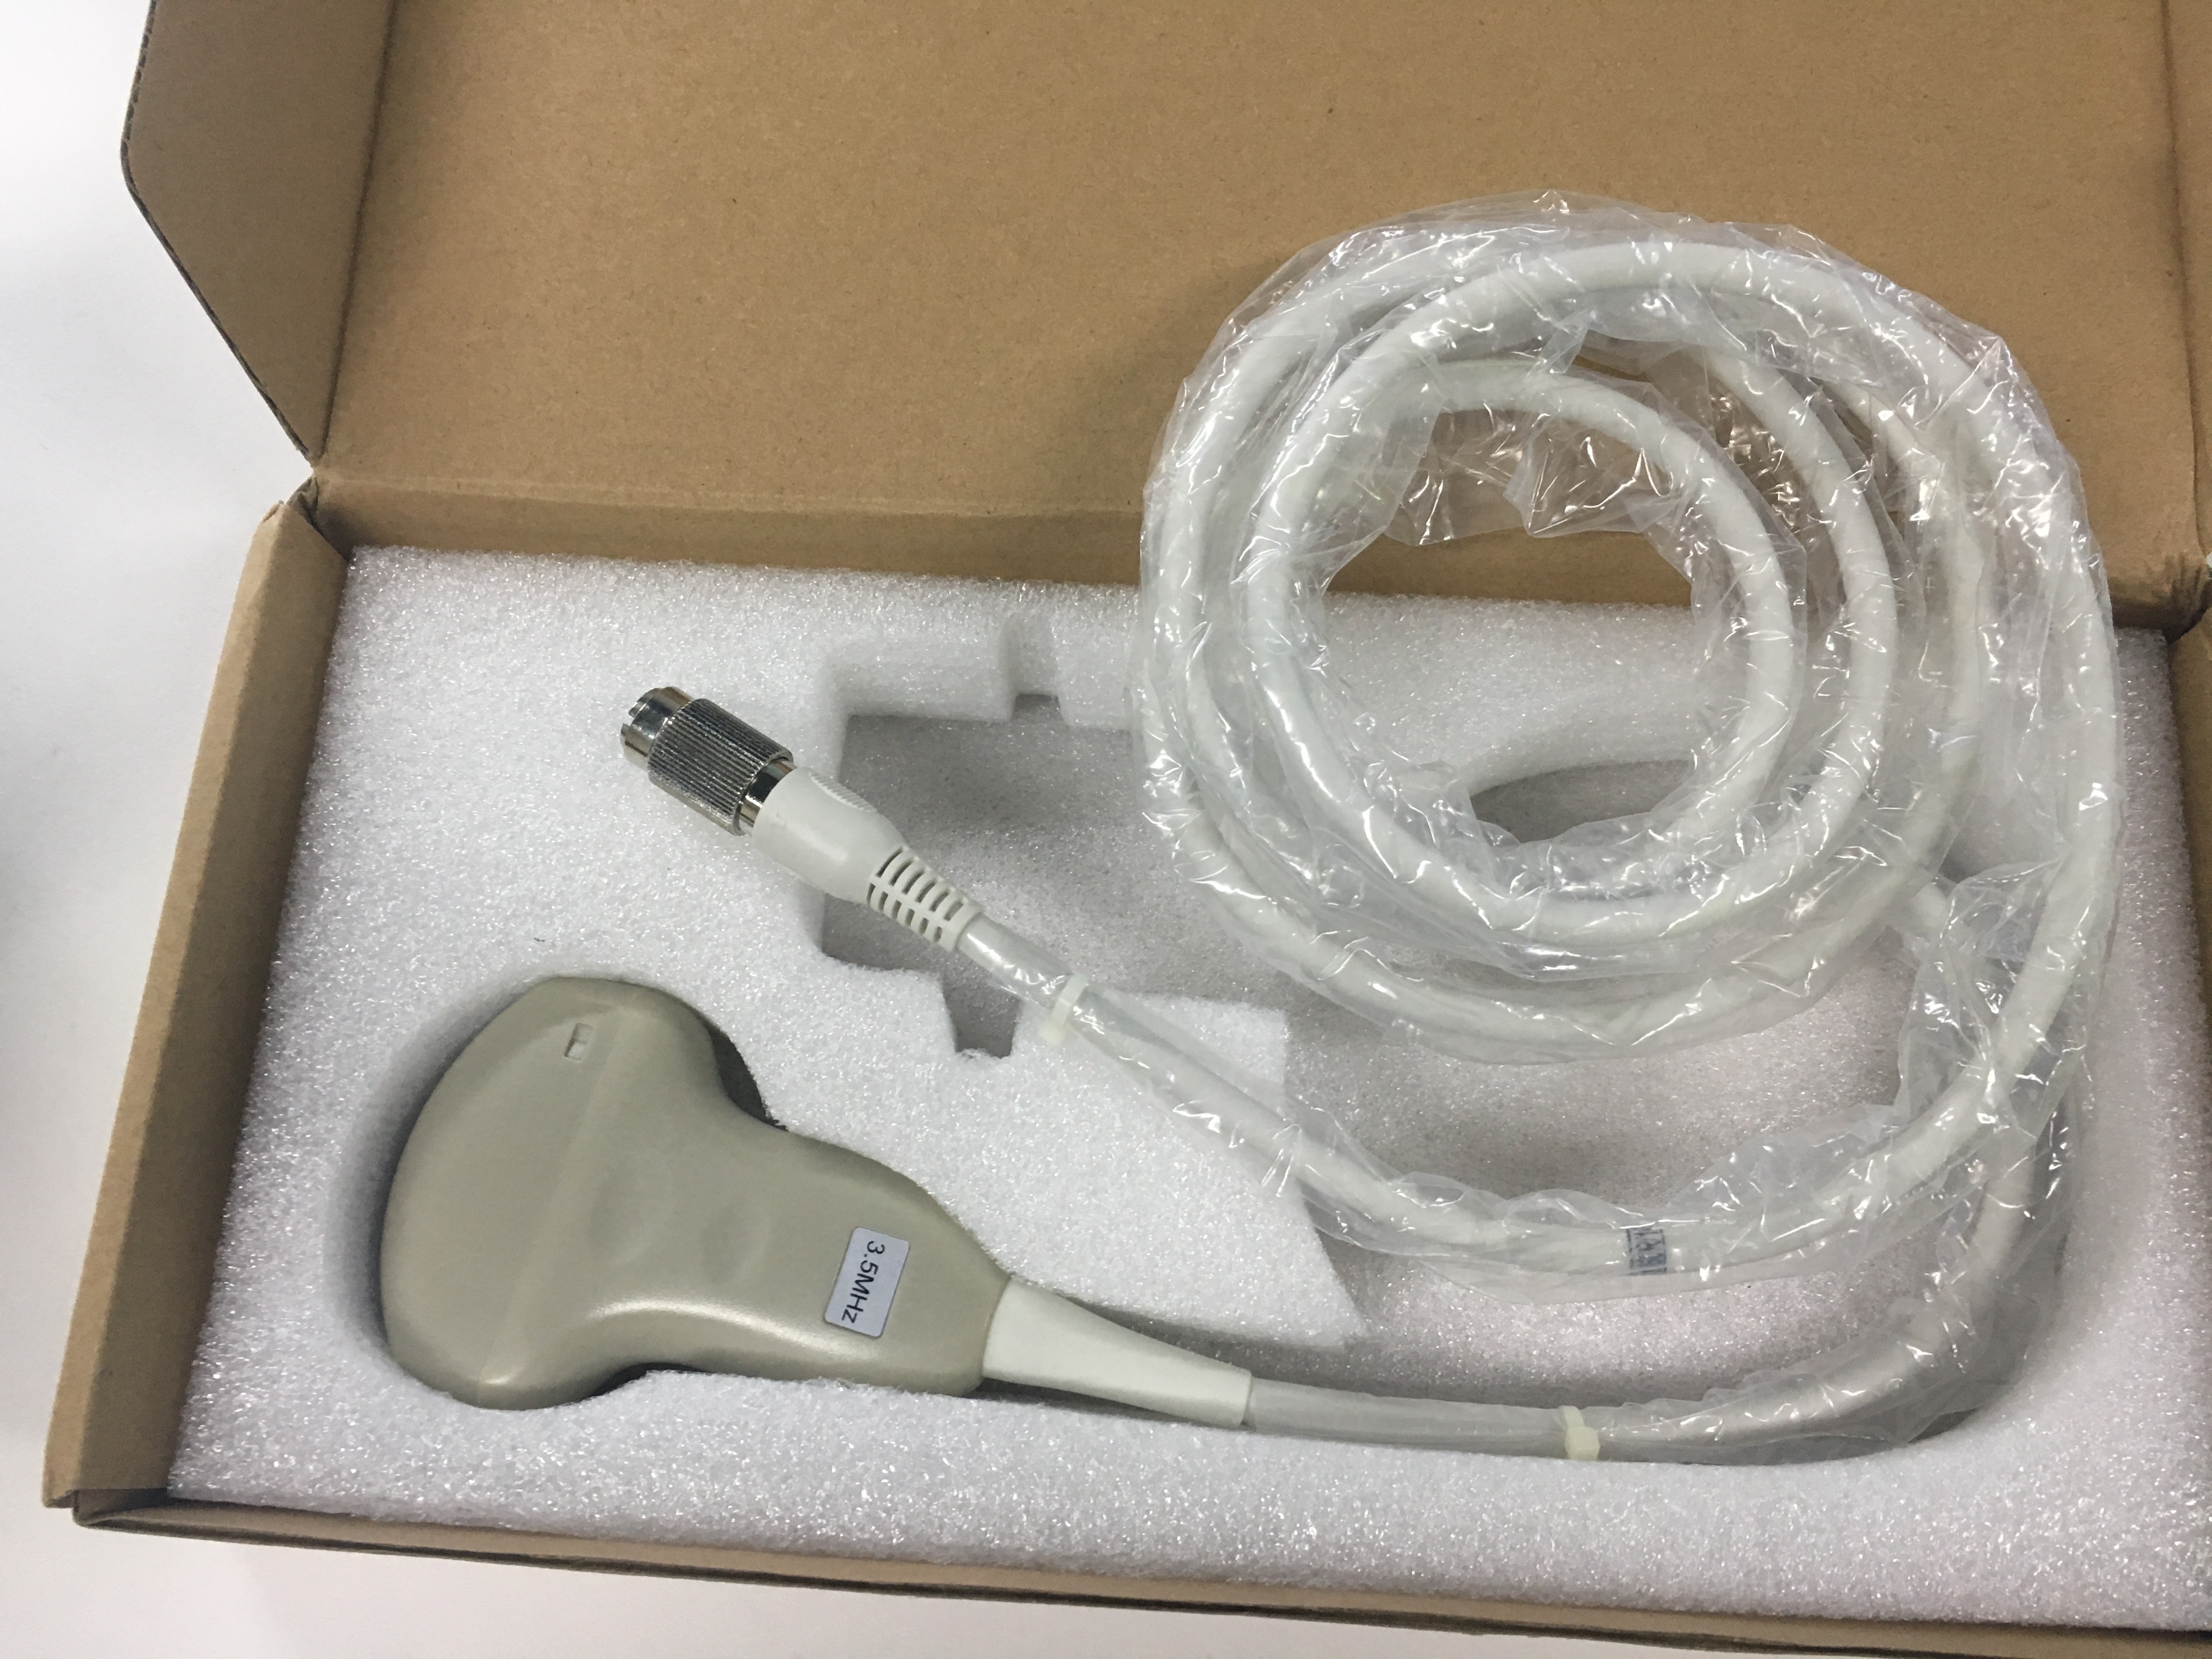 WELLD C1-11/50R Convex Array Transducer Probe for  WED-3500V WED-3100V / WED-3500 WED-3100 